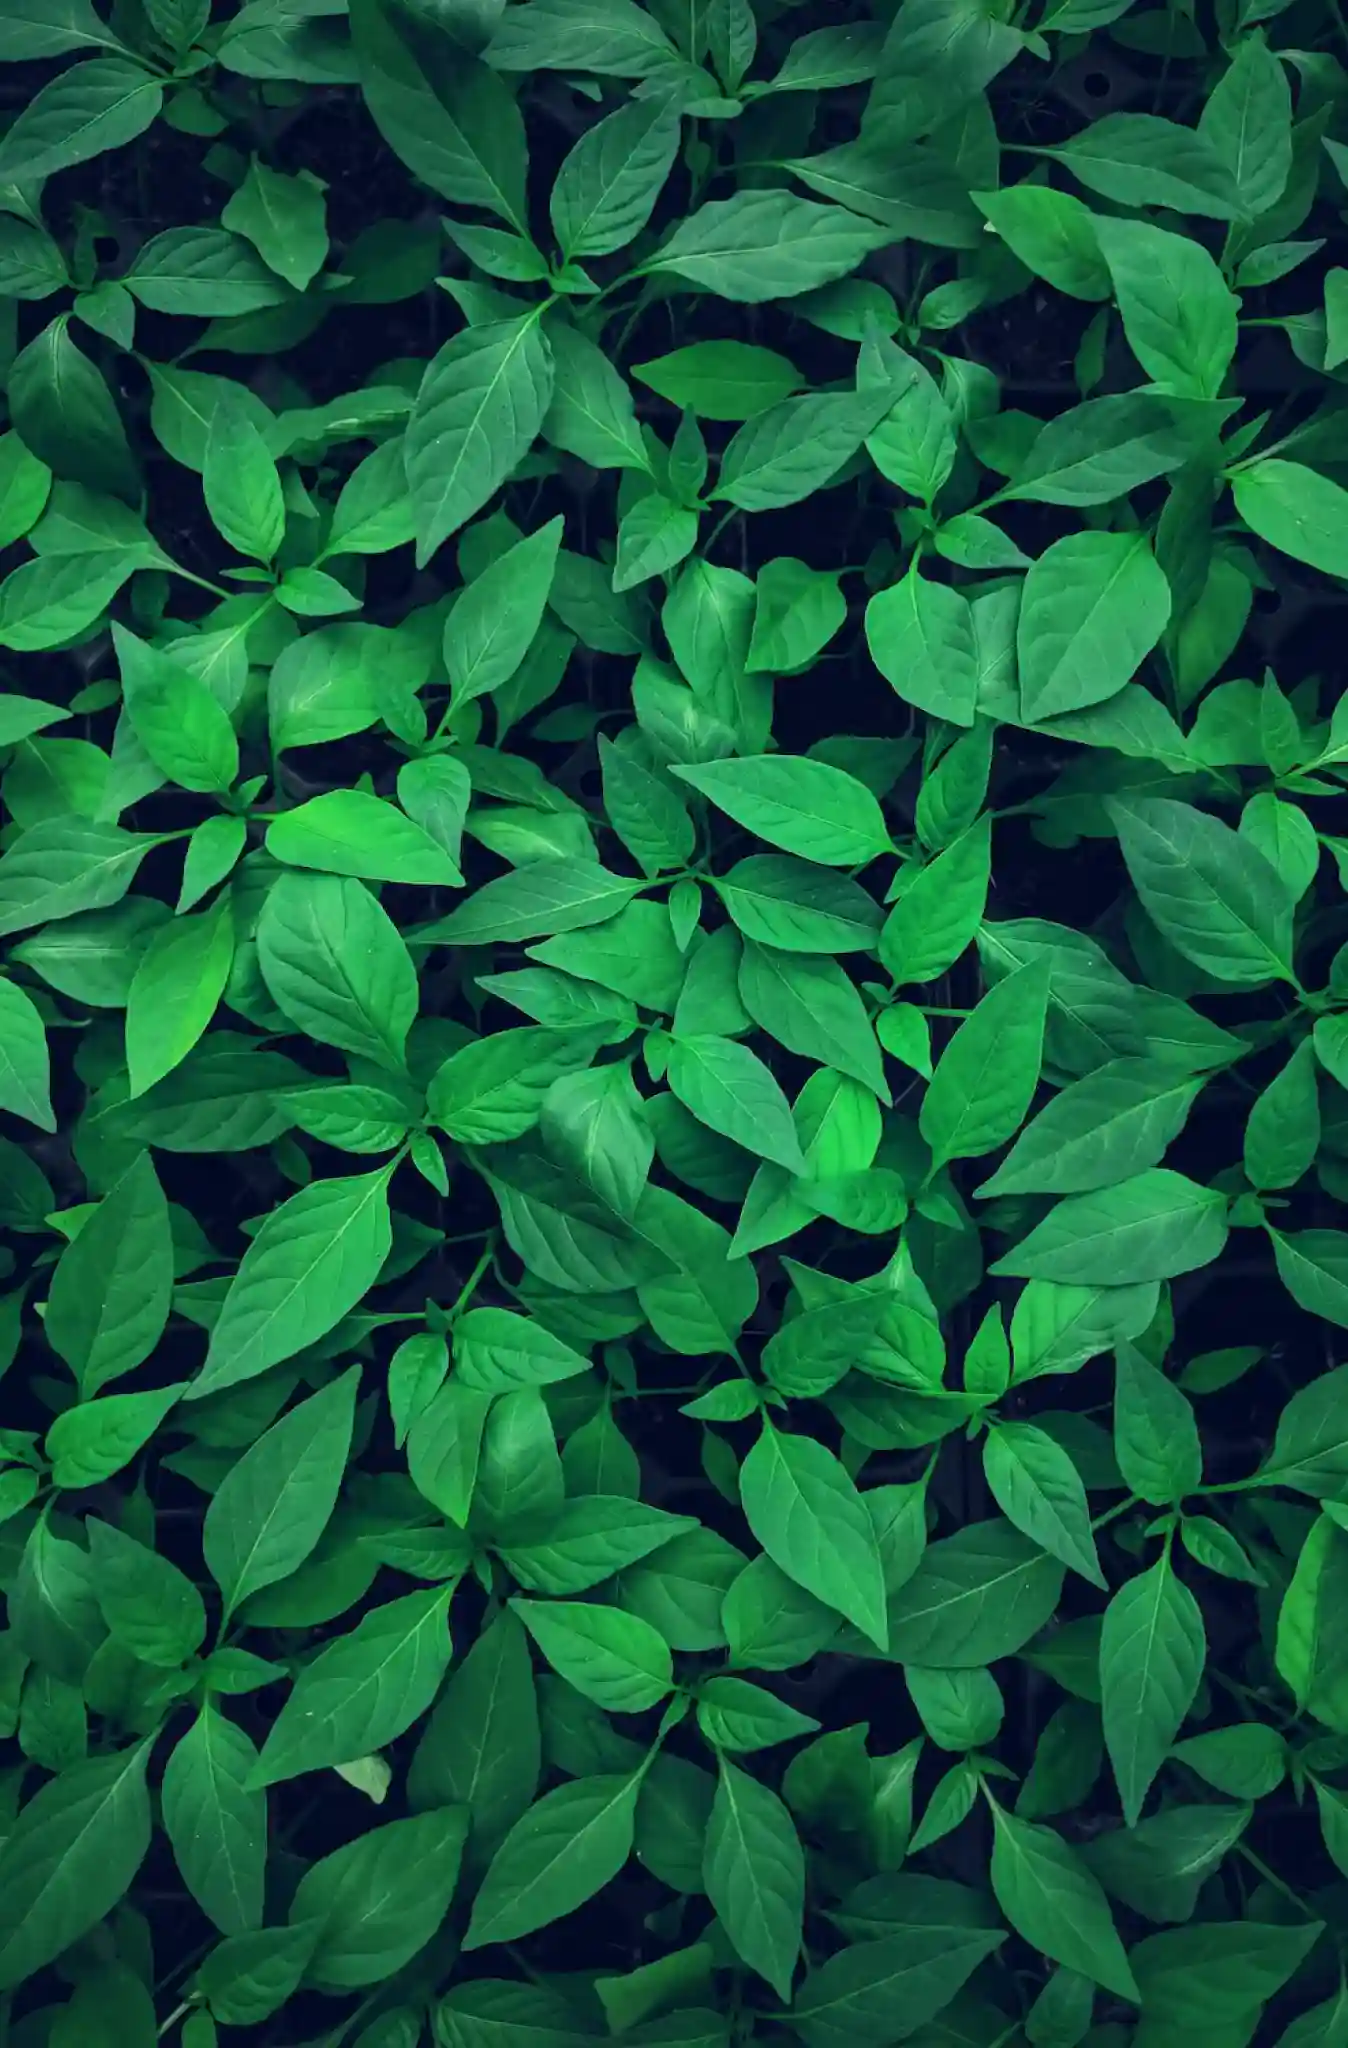 Green bush with small leaves